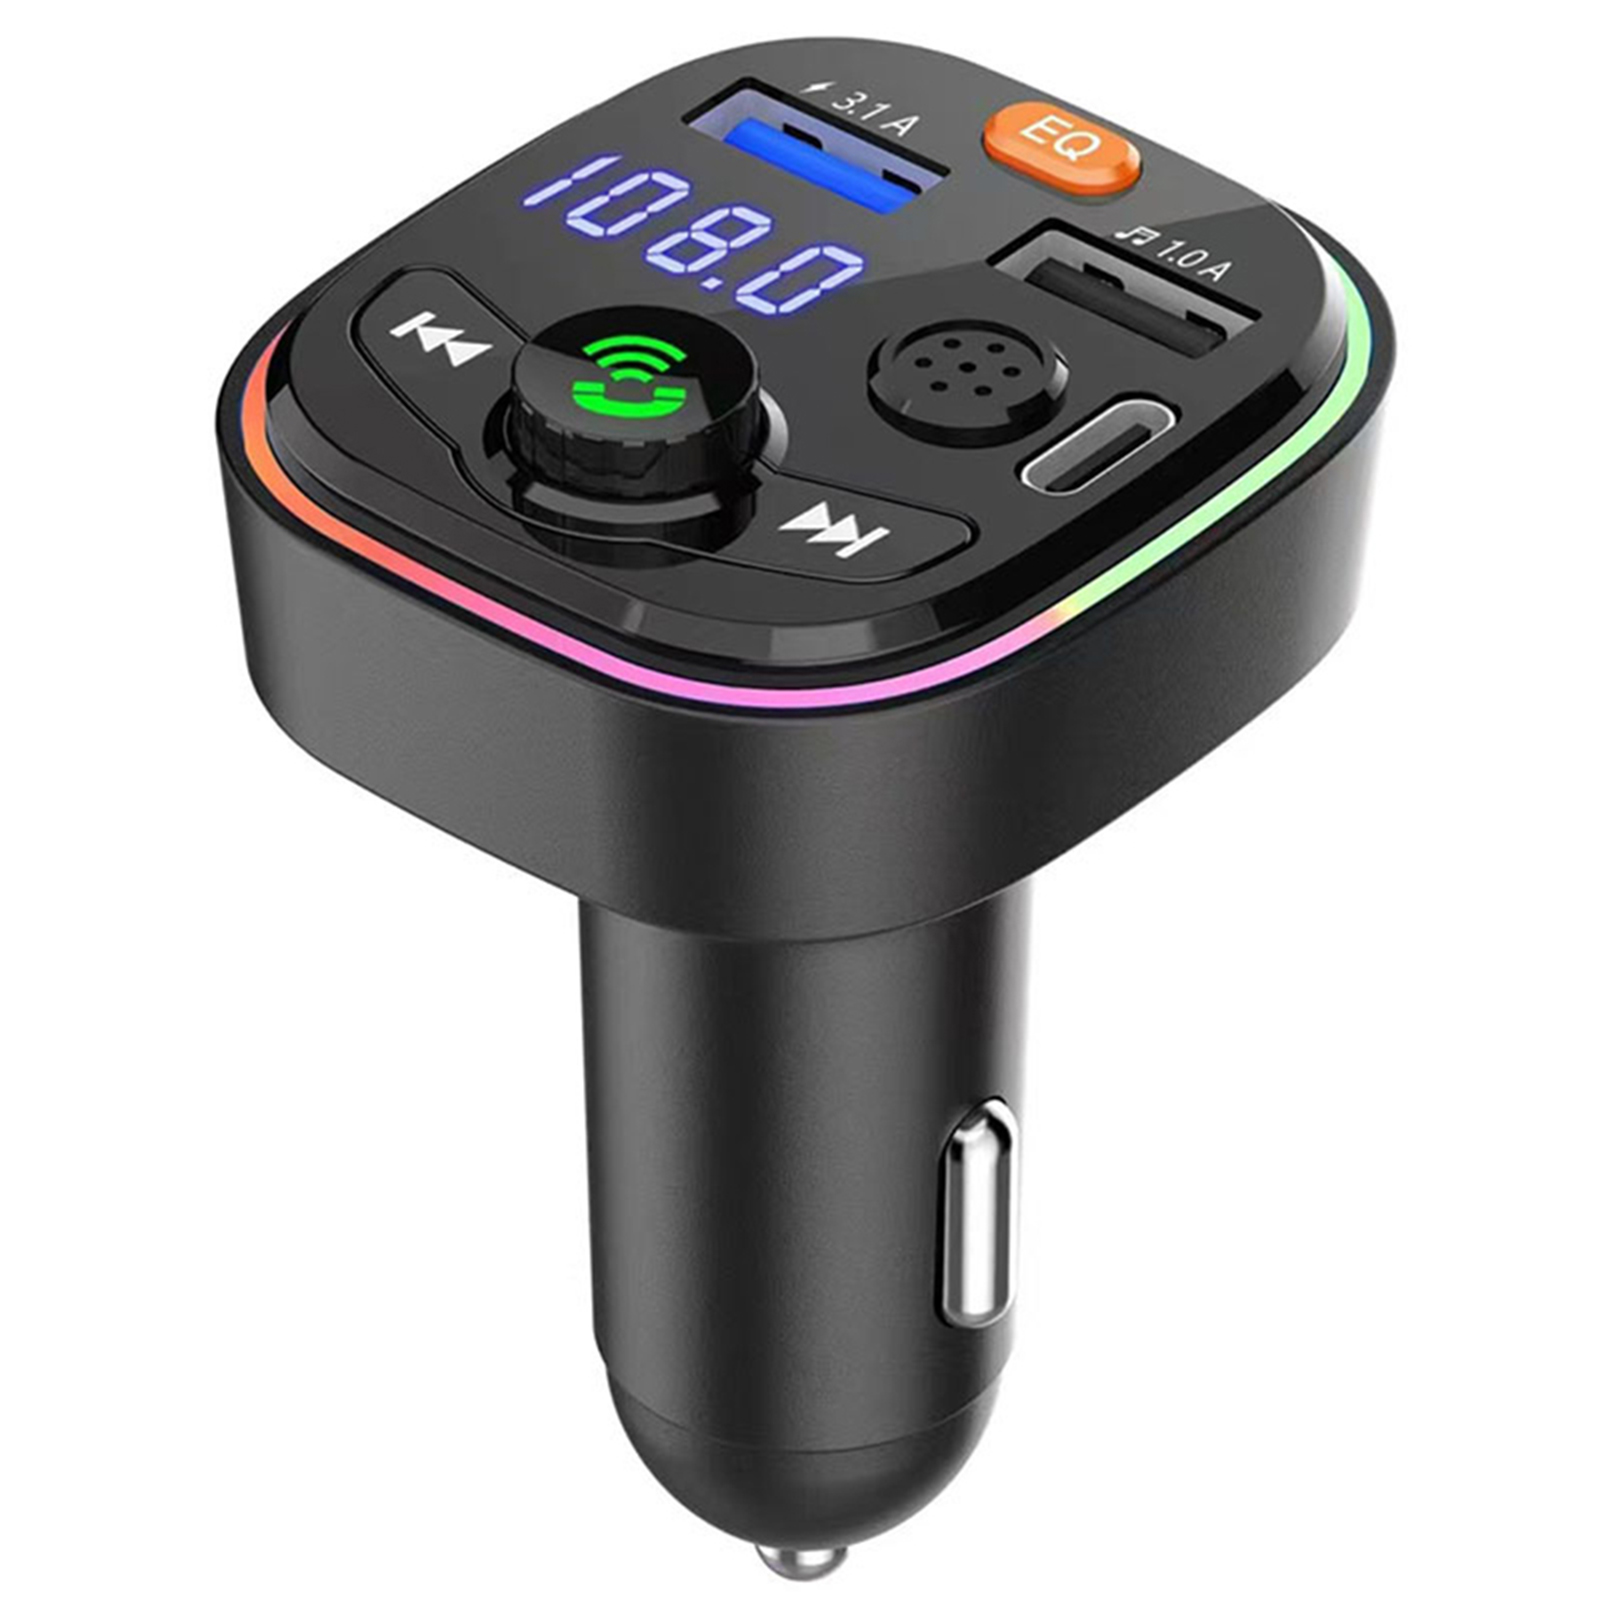 Q6 Car Radio FM Transmitter Dual USB Fast Charging Adapter MP3 Music Player Hands Free Car Kit With Pressure Gauge